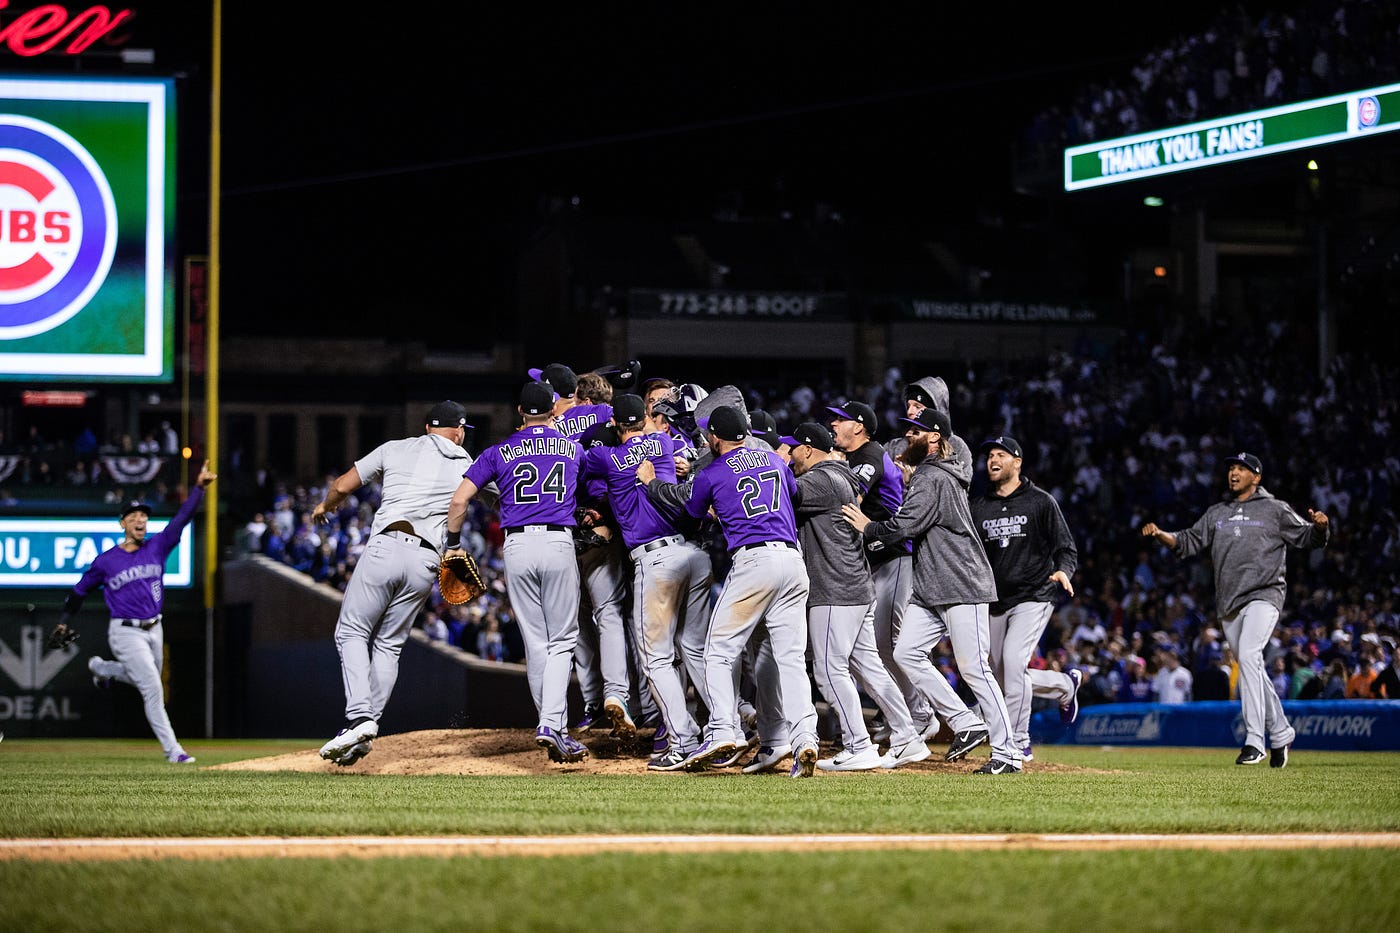 Are the Rockies due for an updated uniform design? Let's discuss